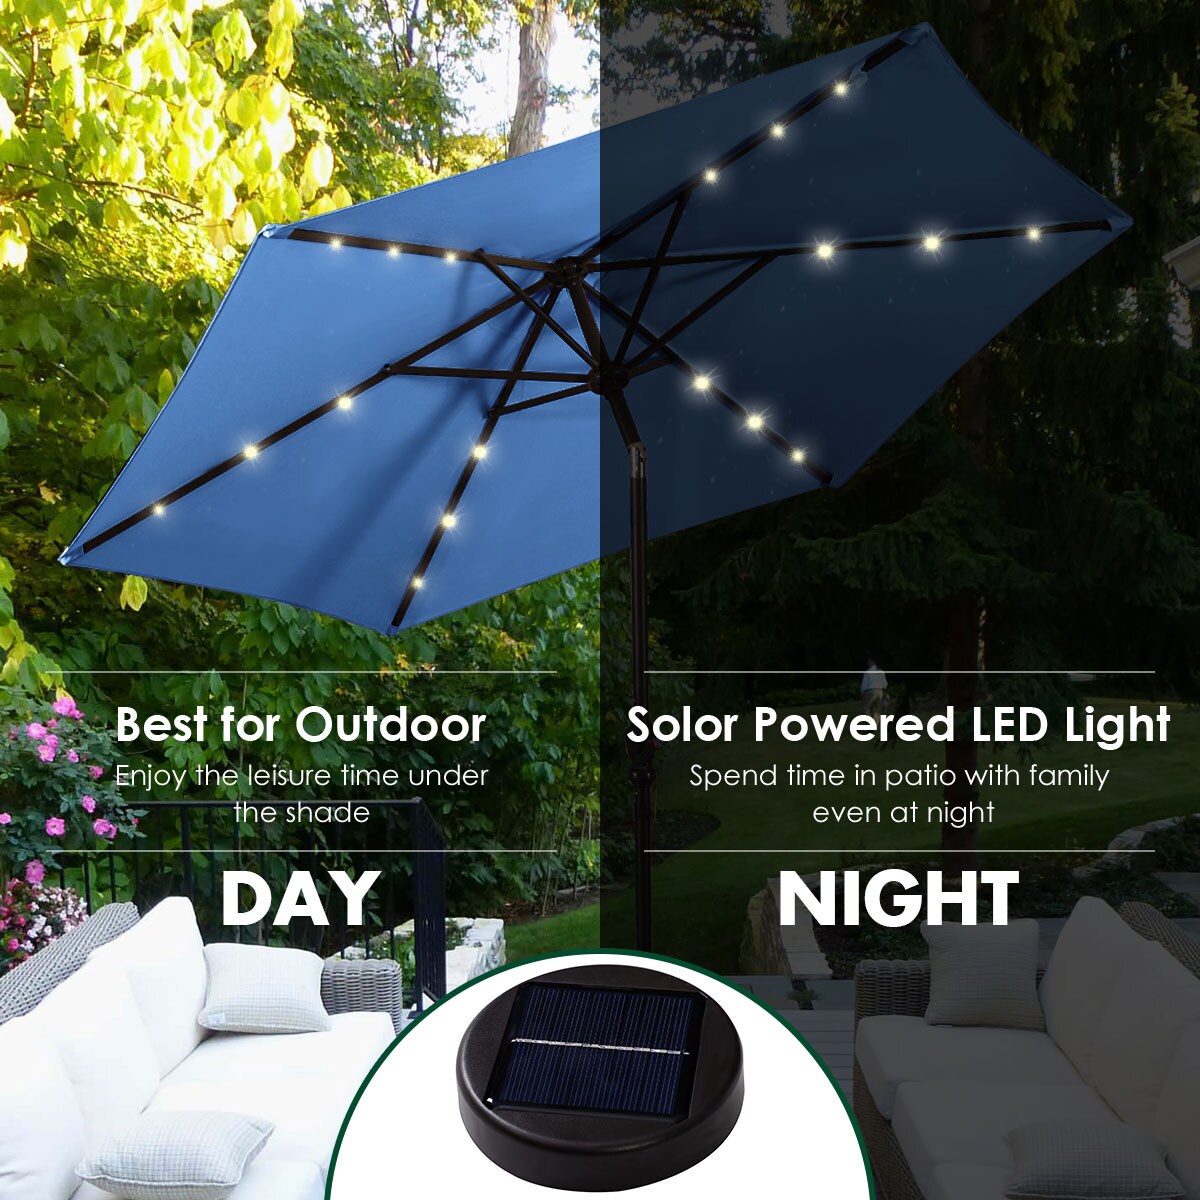 0 LED Solar Powered String Warm 8-9ft Outdoor Patio Umbrell 